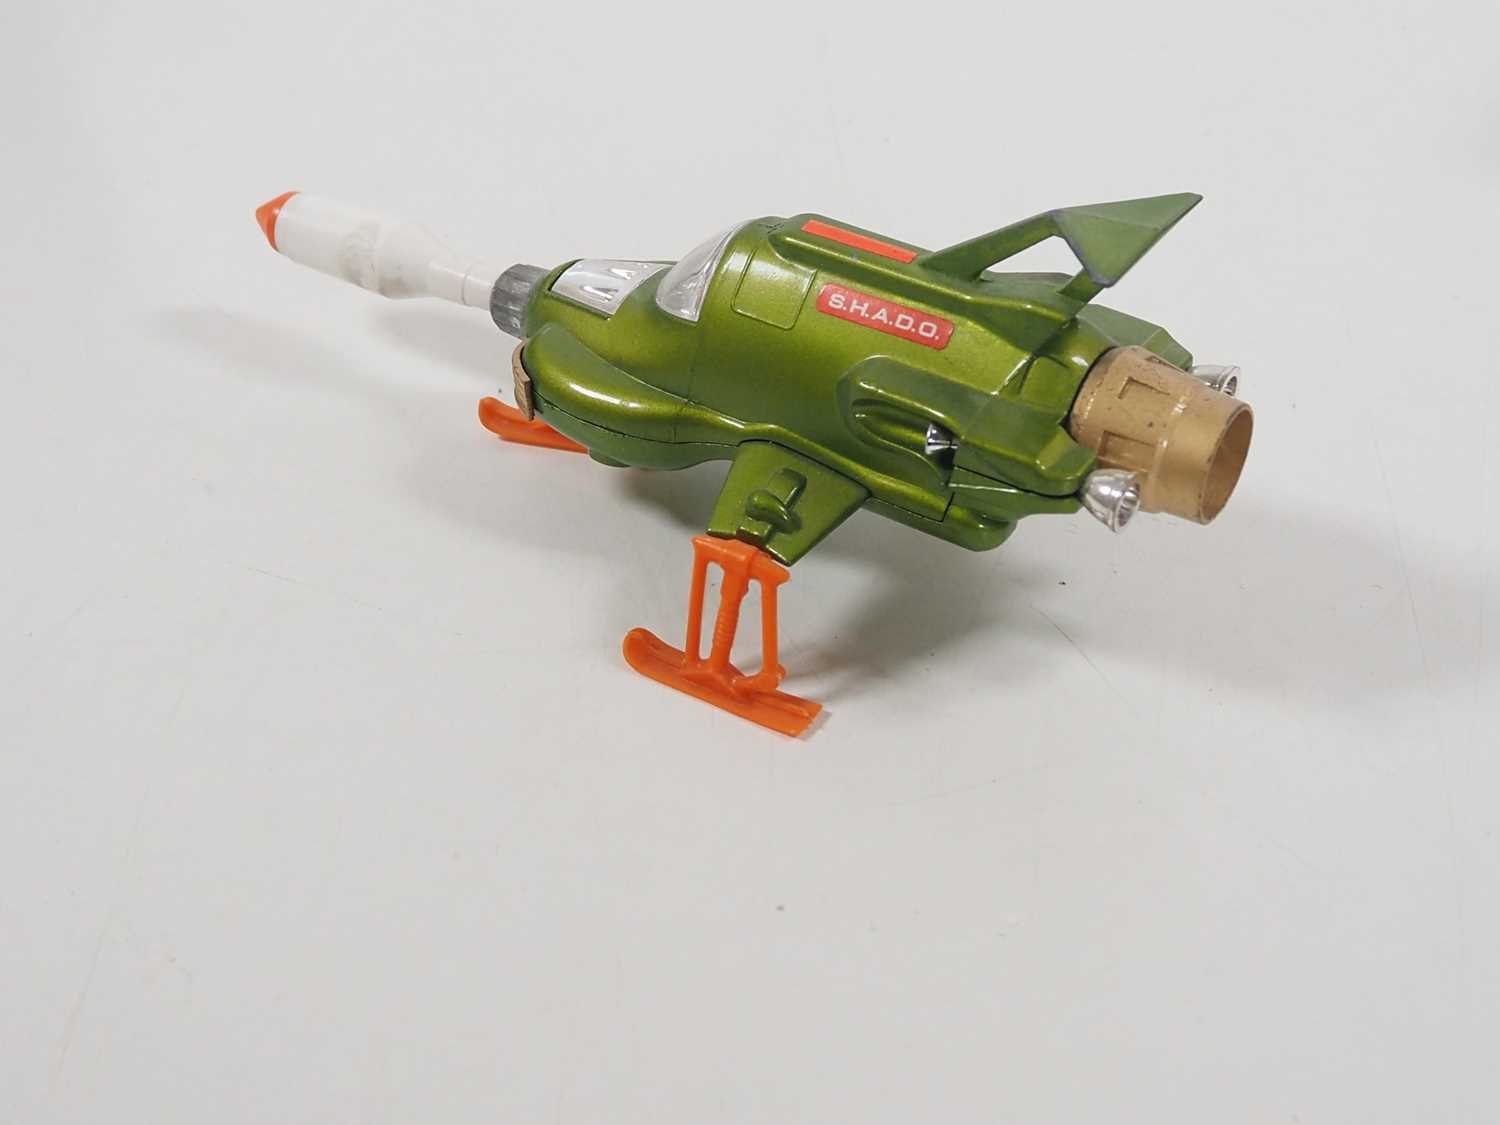 A DINKY 351 Gerry Anderson's 'UFO' Interceptor in metallic green with missile, pictorial card box - Image 7 of 10